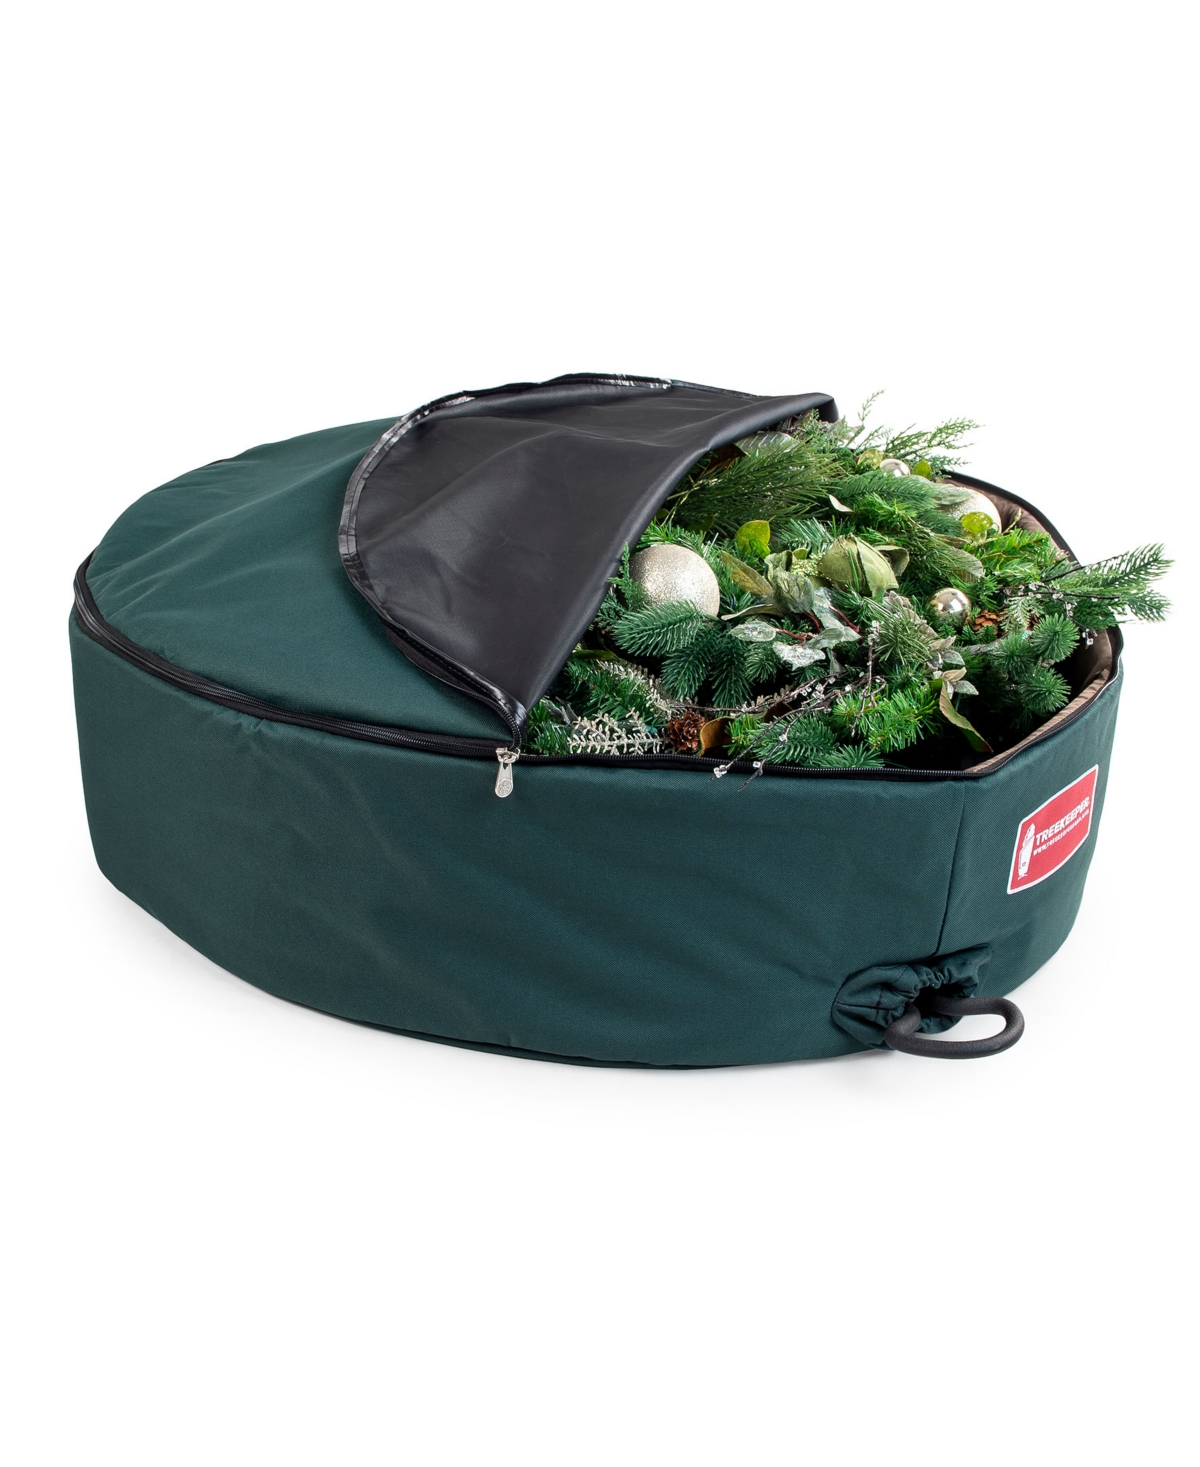 48" Padded Christmas Wreath Storage Container - Green